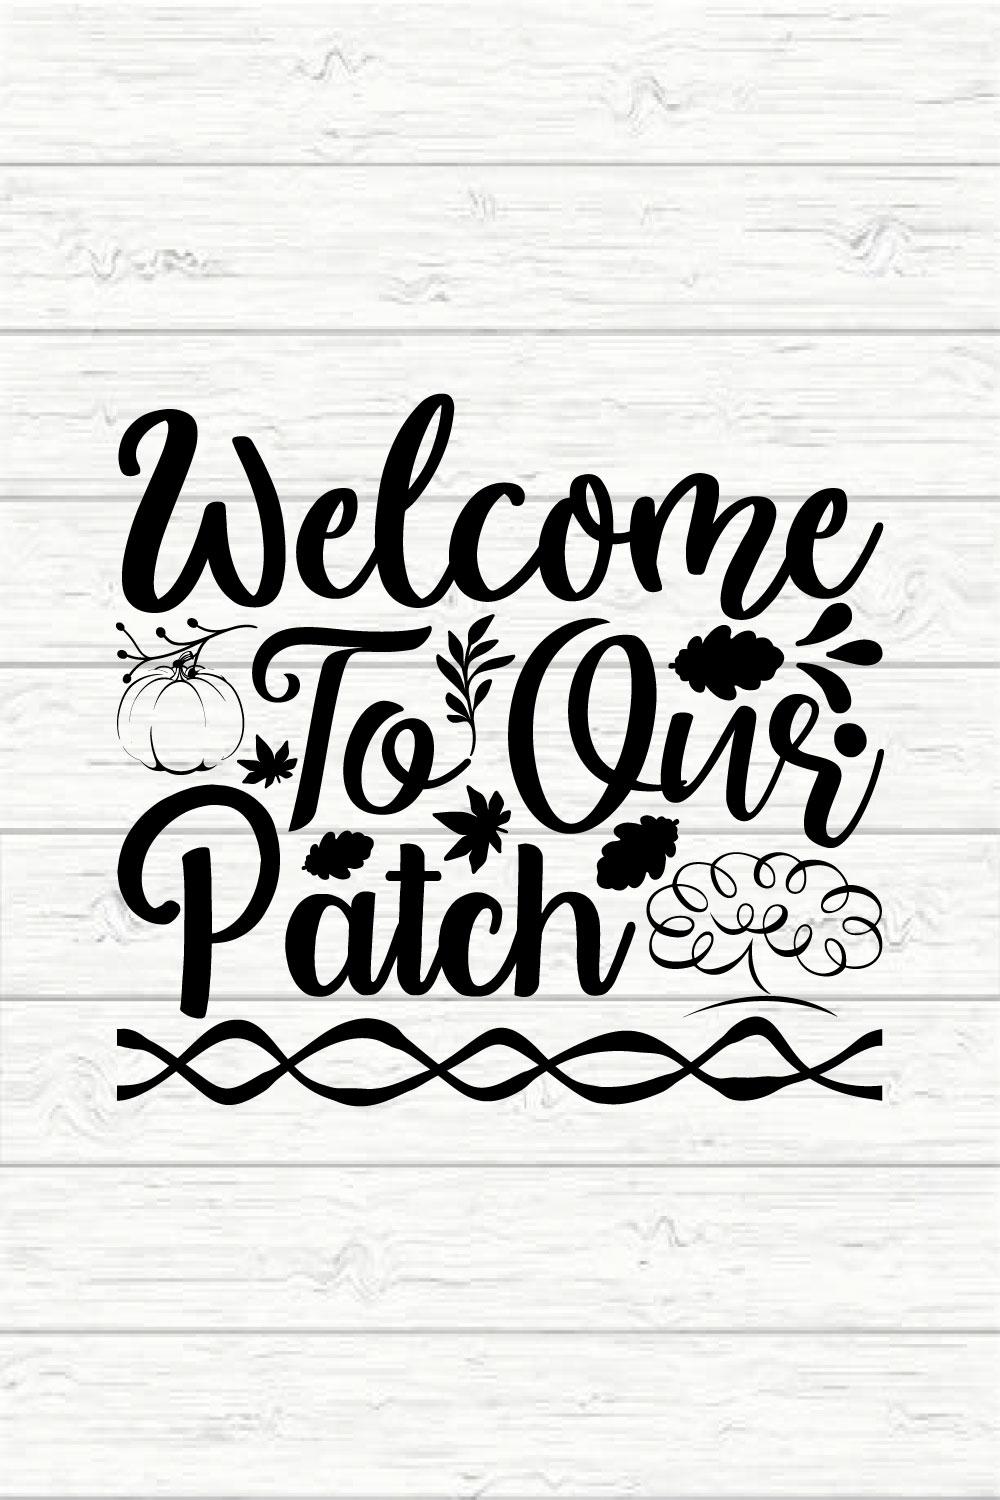 Welcome to our patch pinterest preview image.